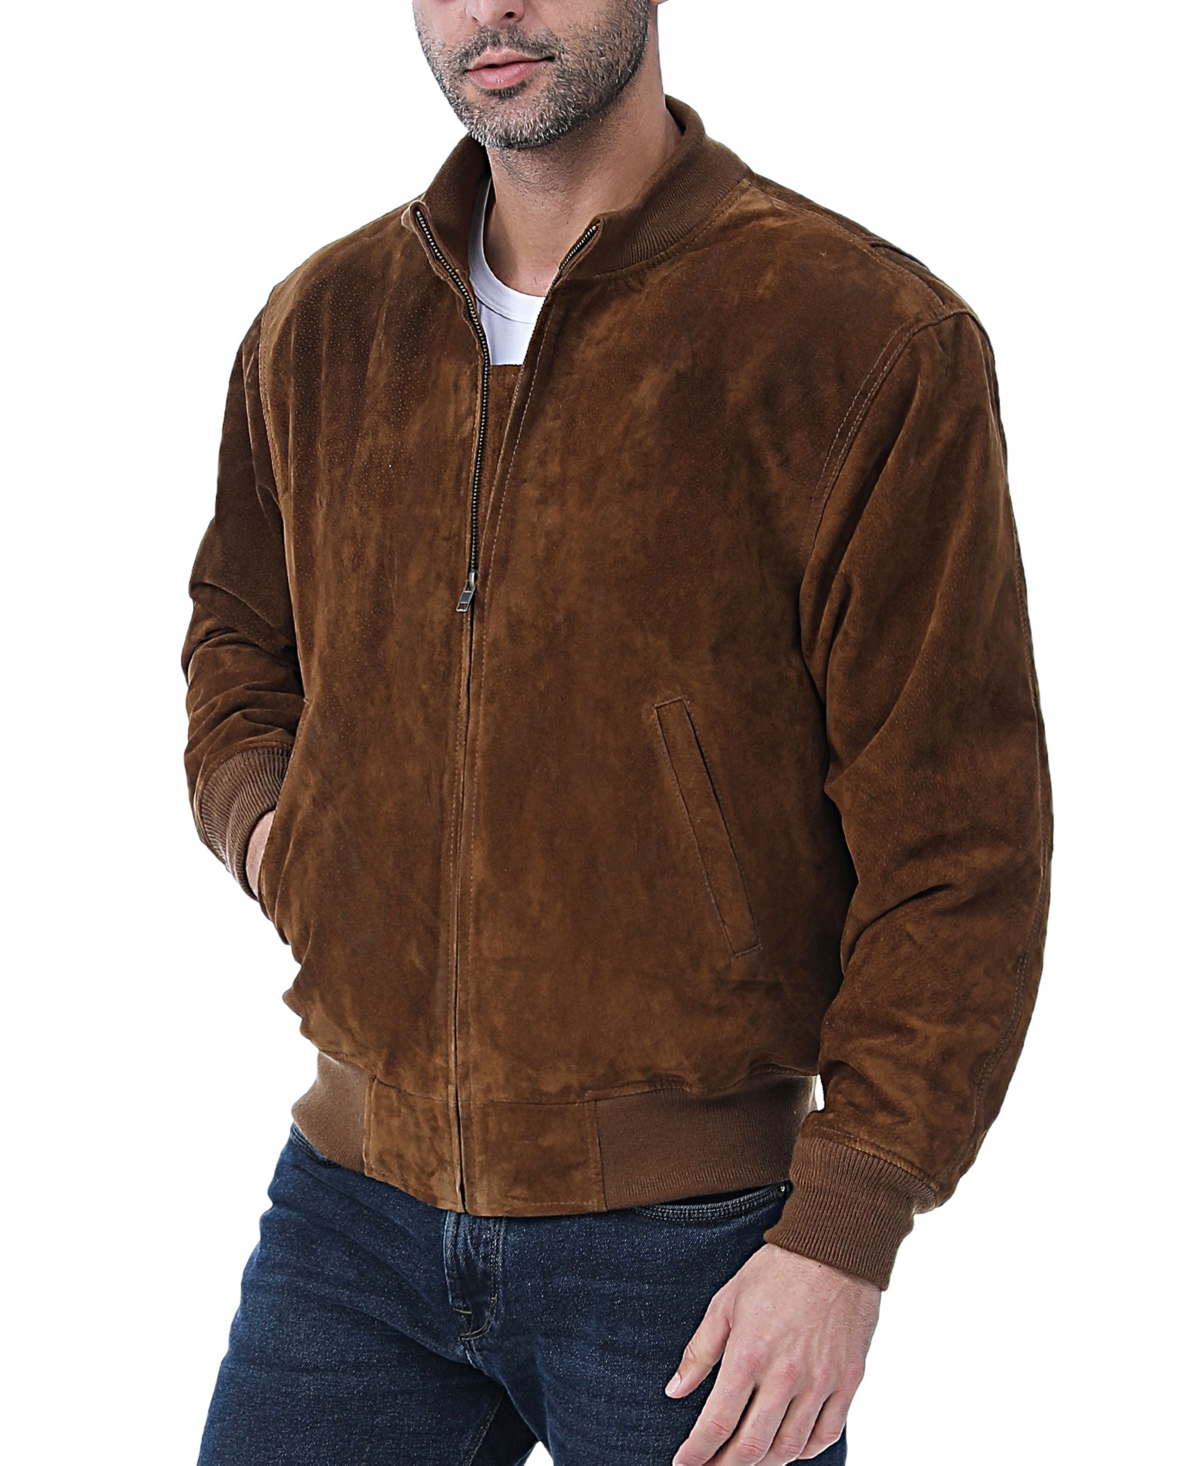 Men Wwii Suede Leather Tanker Jacket - Tall - Tobacco